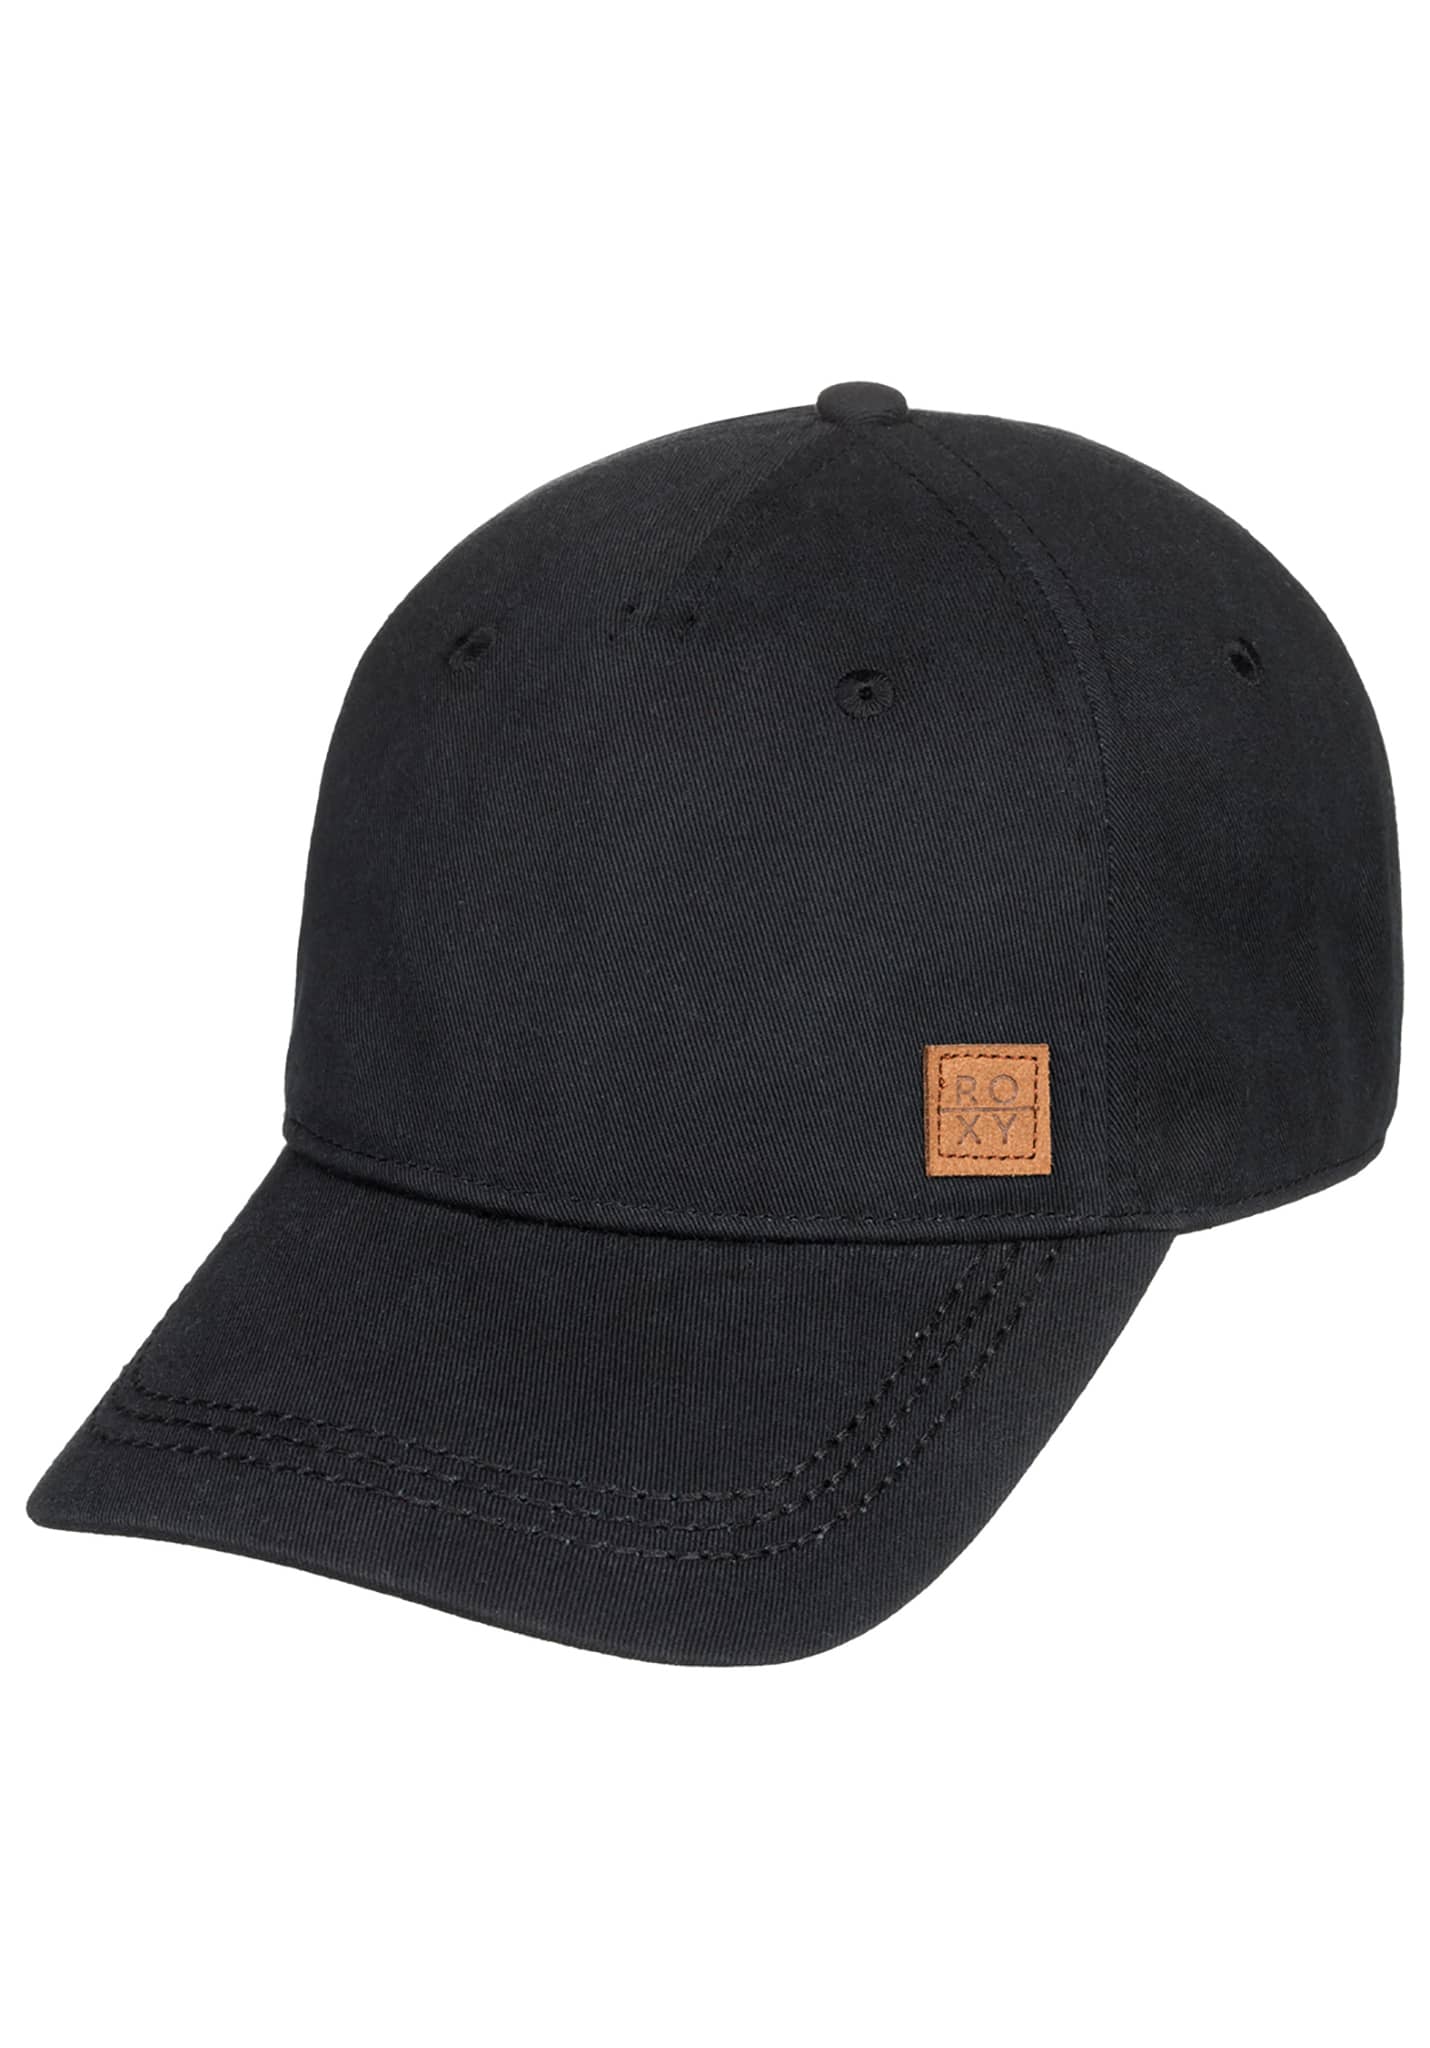 Roxy Extra Innings Strapback Cap anthracite One Size